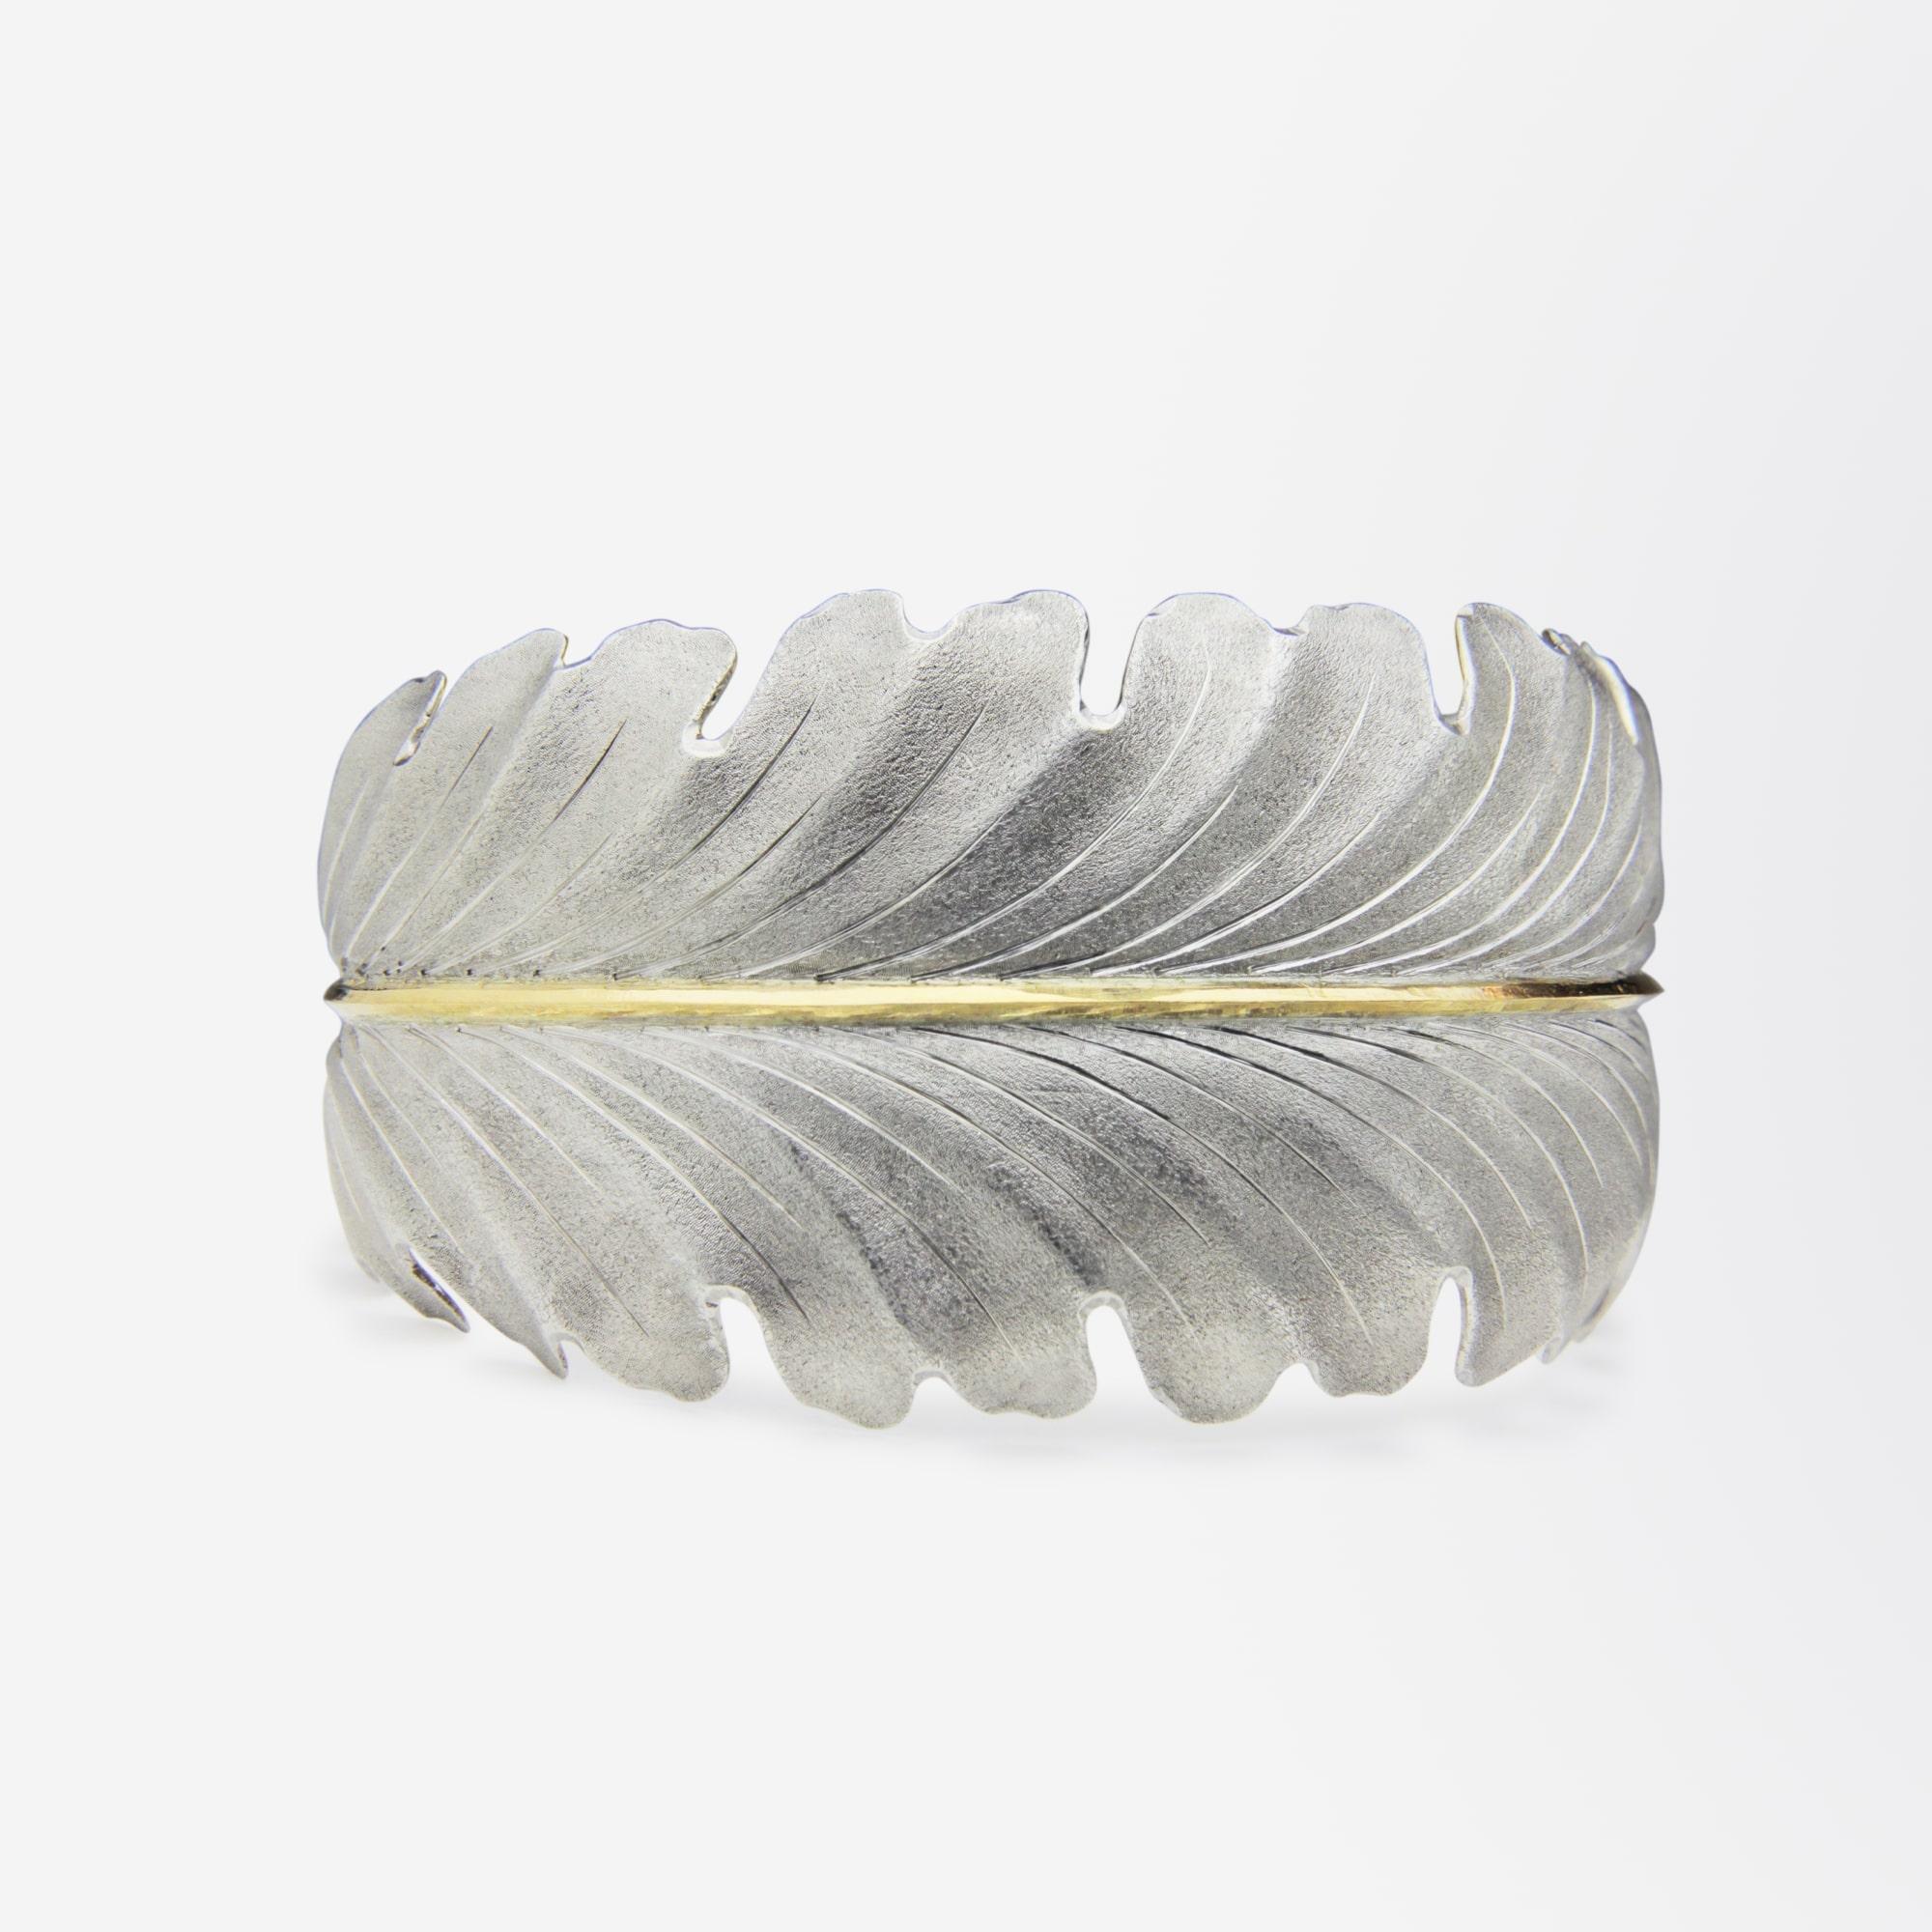 A handcrafted cuff in the form of an acanthus leaf by Gianmaria Buccellati. The piece is formed from sterling silver with a central vein of 18 karat yellow gold. The matte 'Florentine' finish to the piece has a silky smooth appearance and texture.